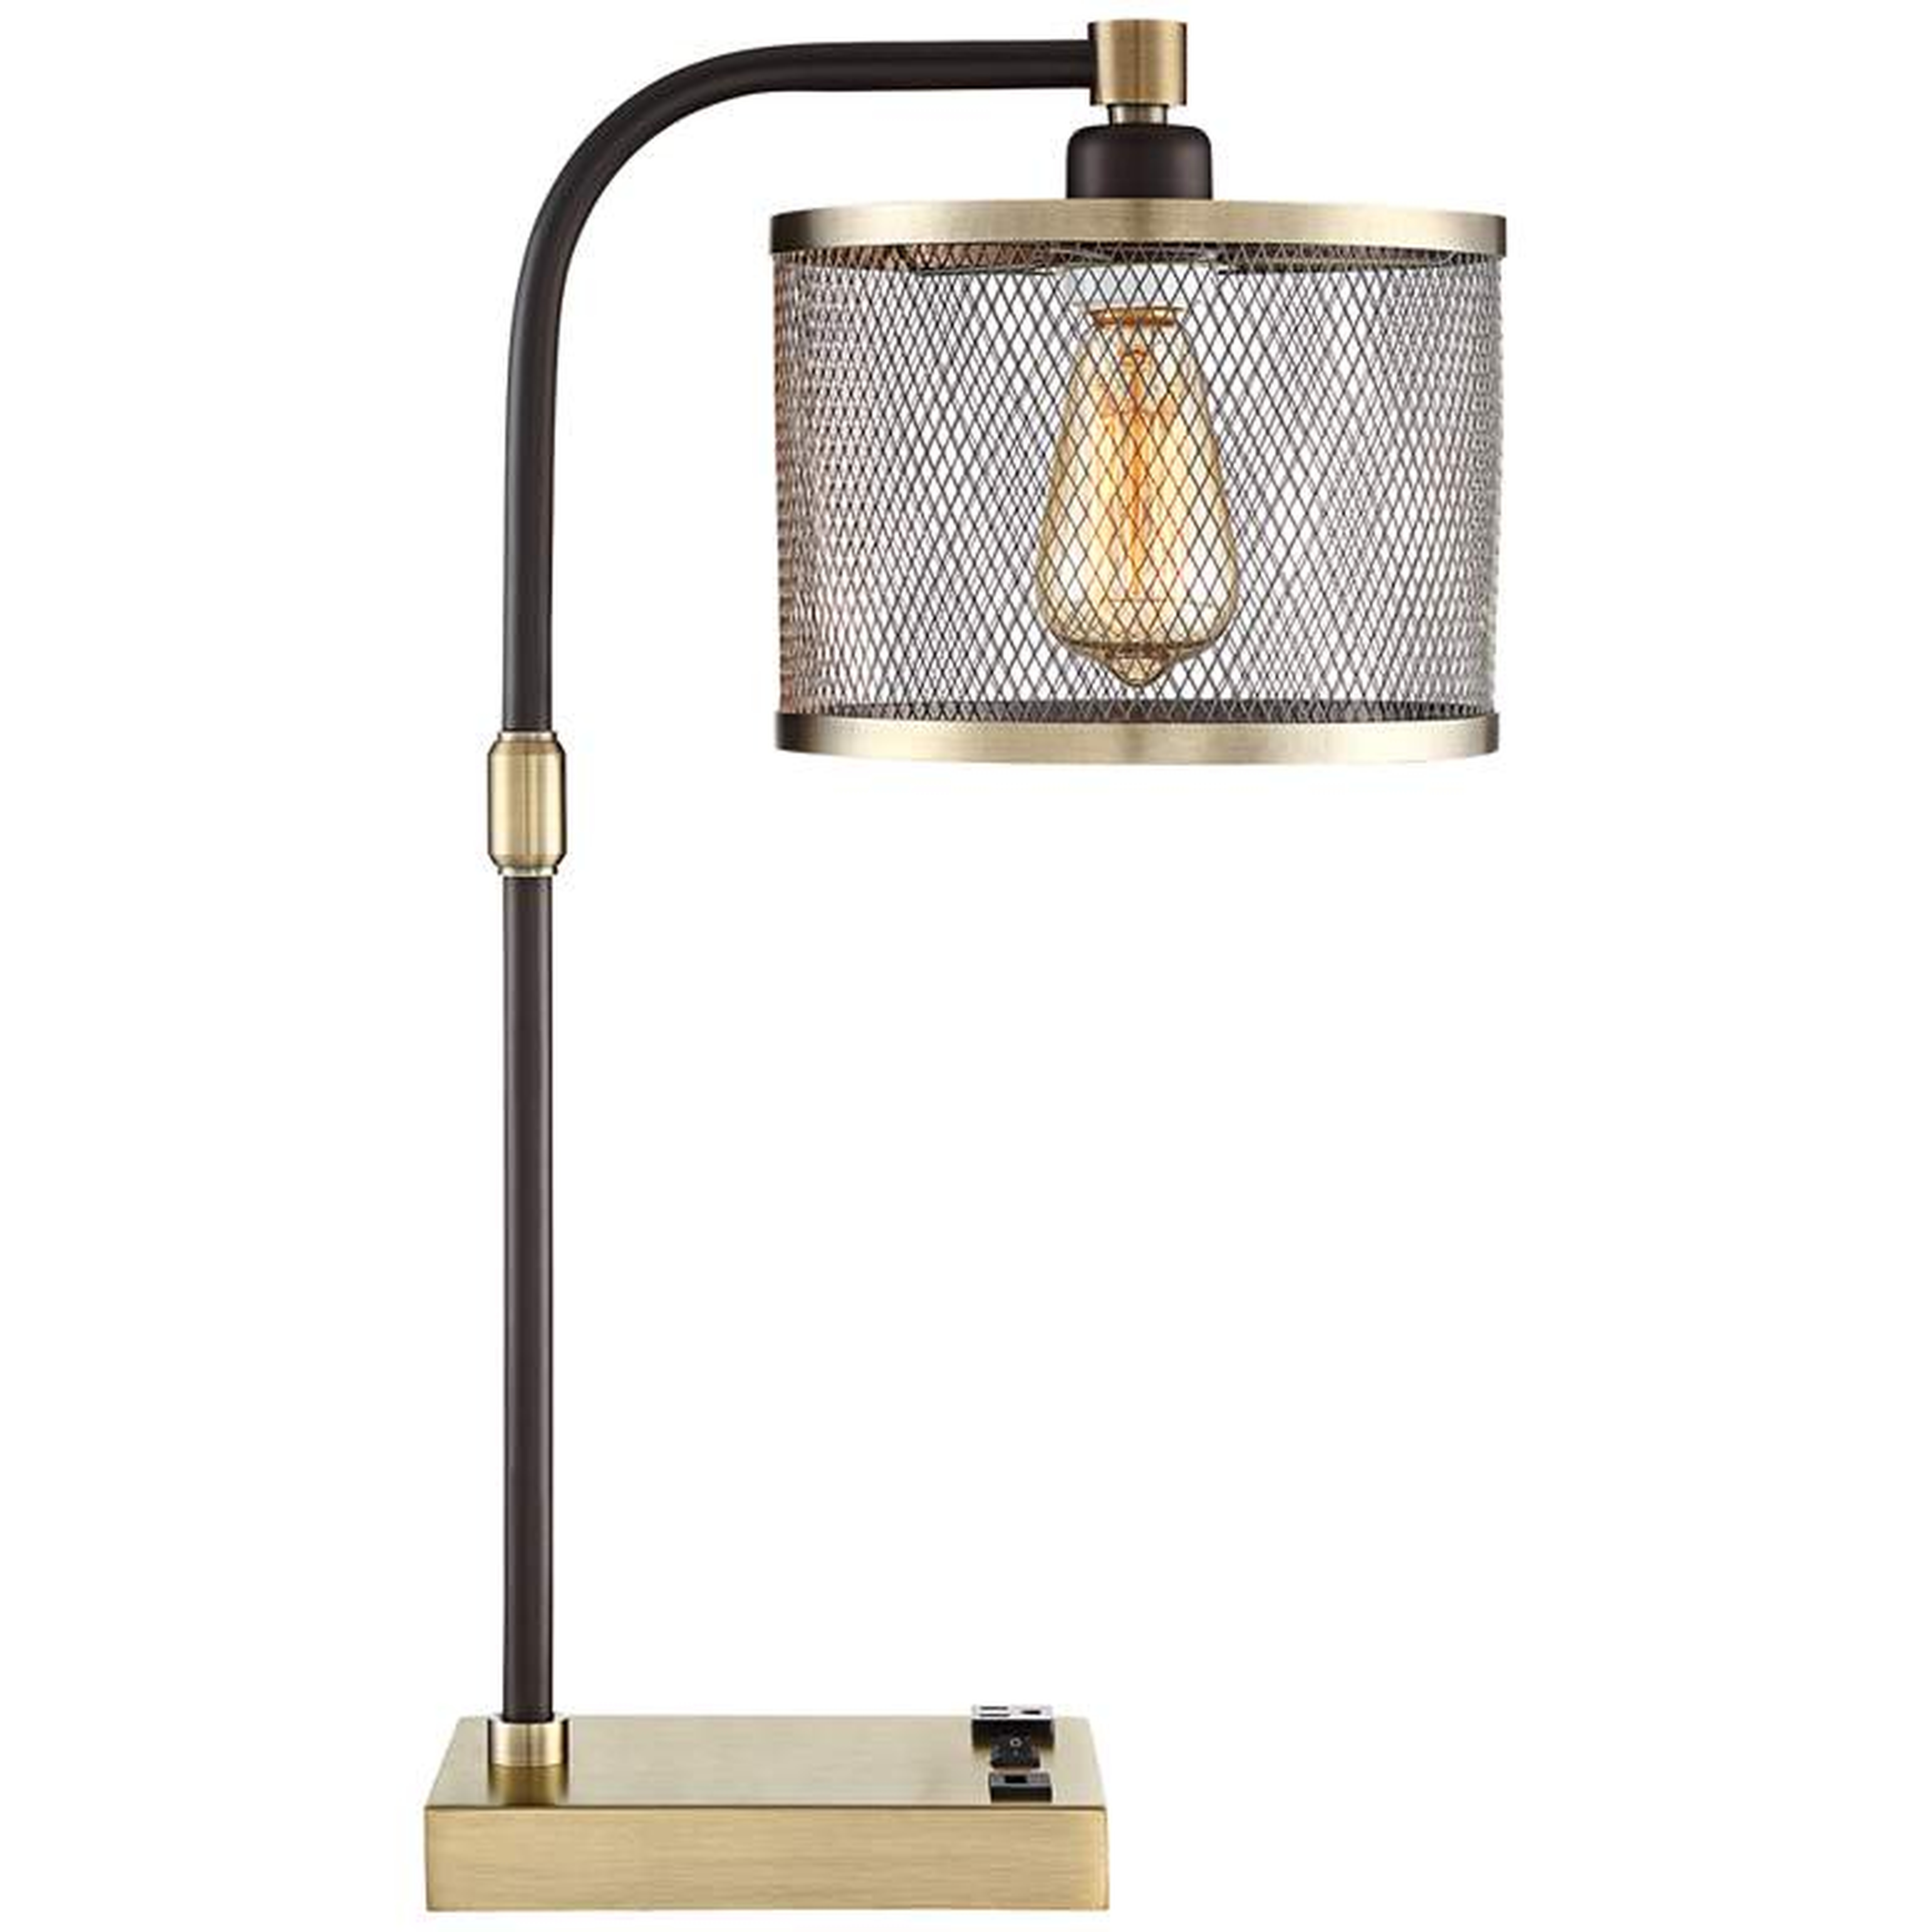 Brody Antique Brass Desk Lamp with USB and Outlet - Lamps Plus